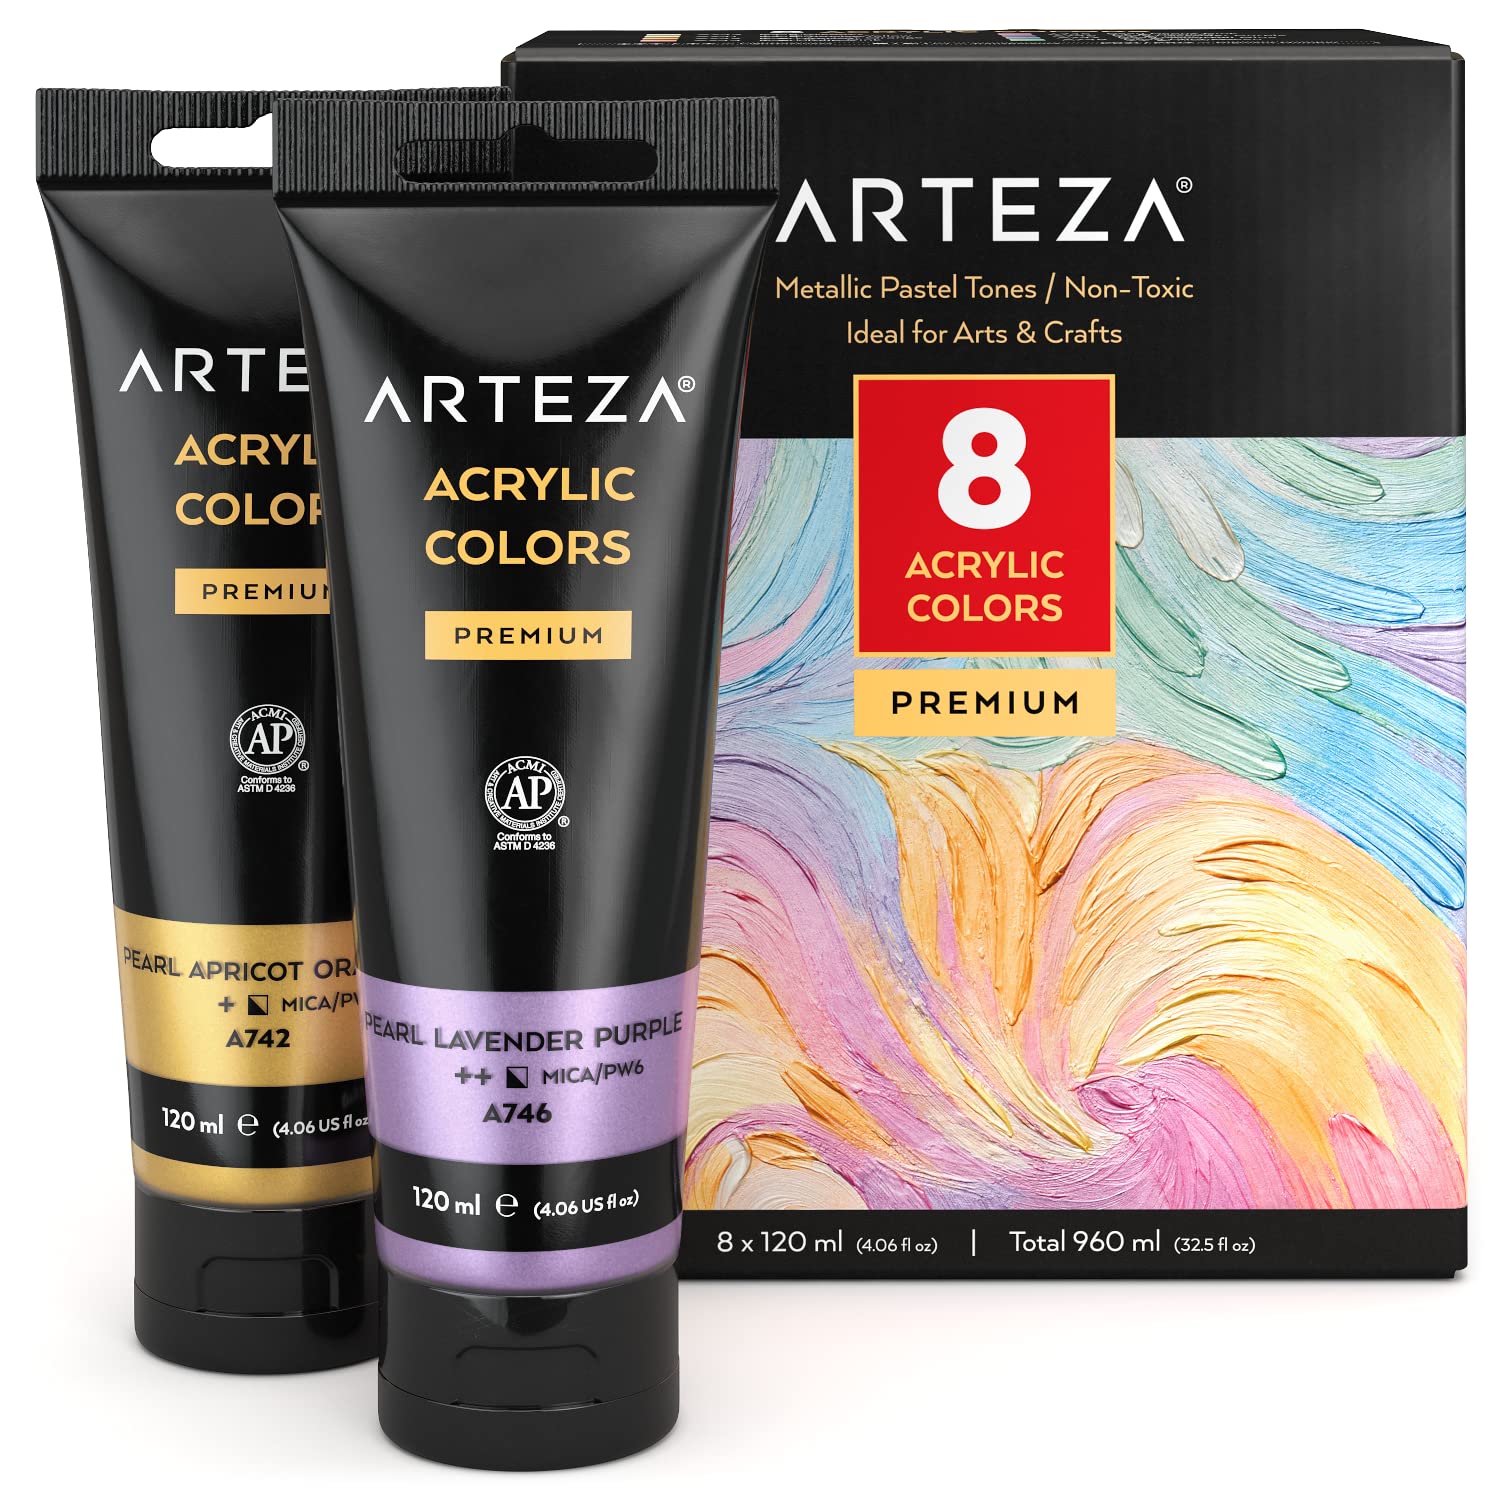 ARTEZA Pastel Acrylic Paint, Set of 8, Metallic Tones, 4.06 fl oz Tubes, High Viscosity Water-Based Paint, Glossy Finish, Art Supplies for Painting Paper, Canvas, Wood and Fabric, and DIY Projects